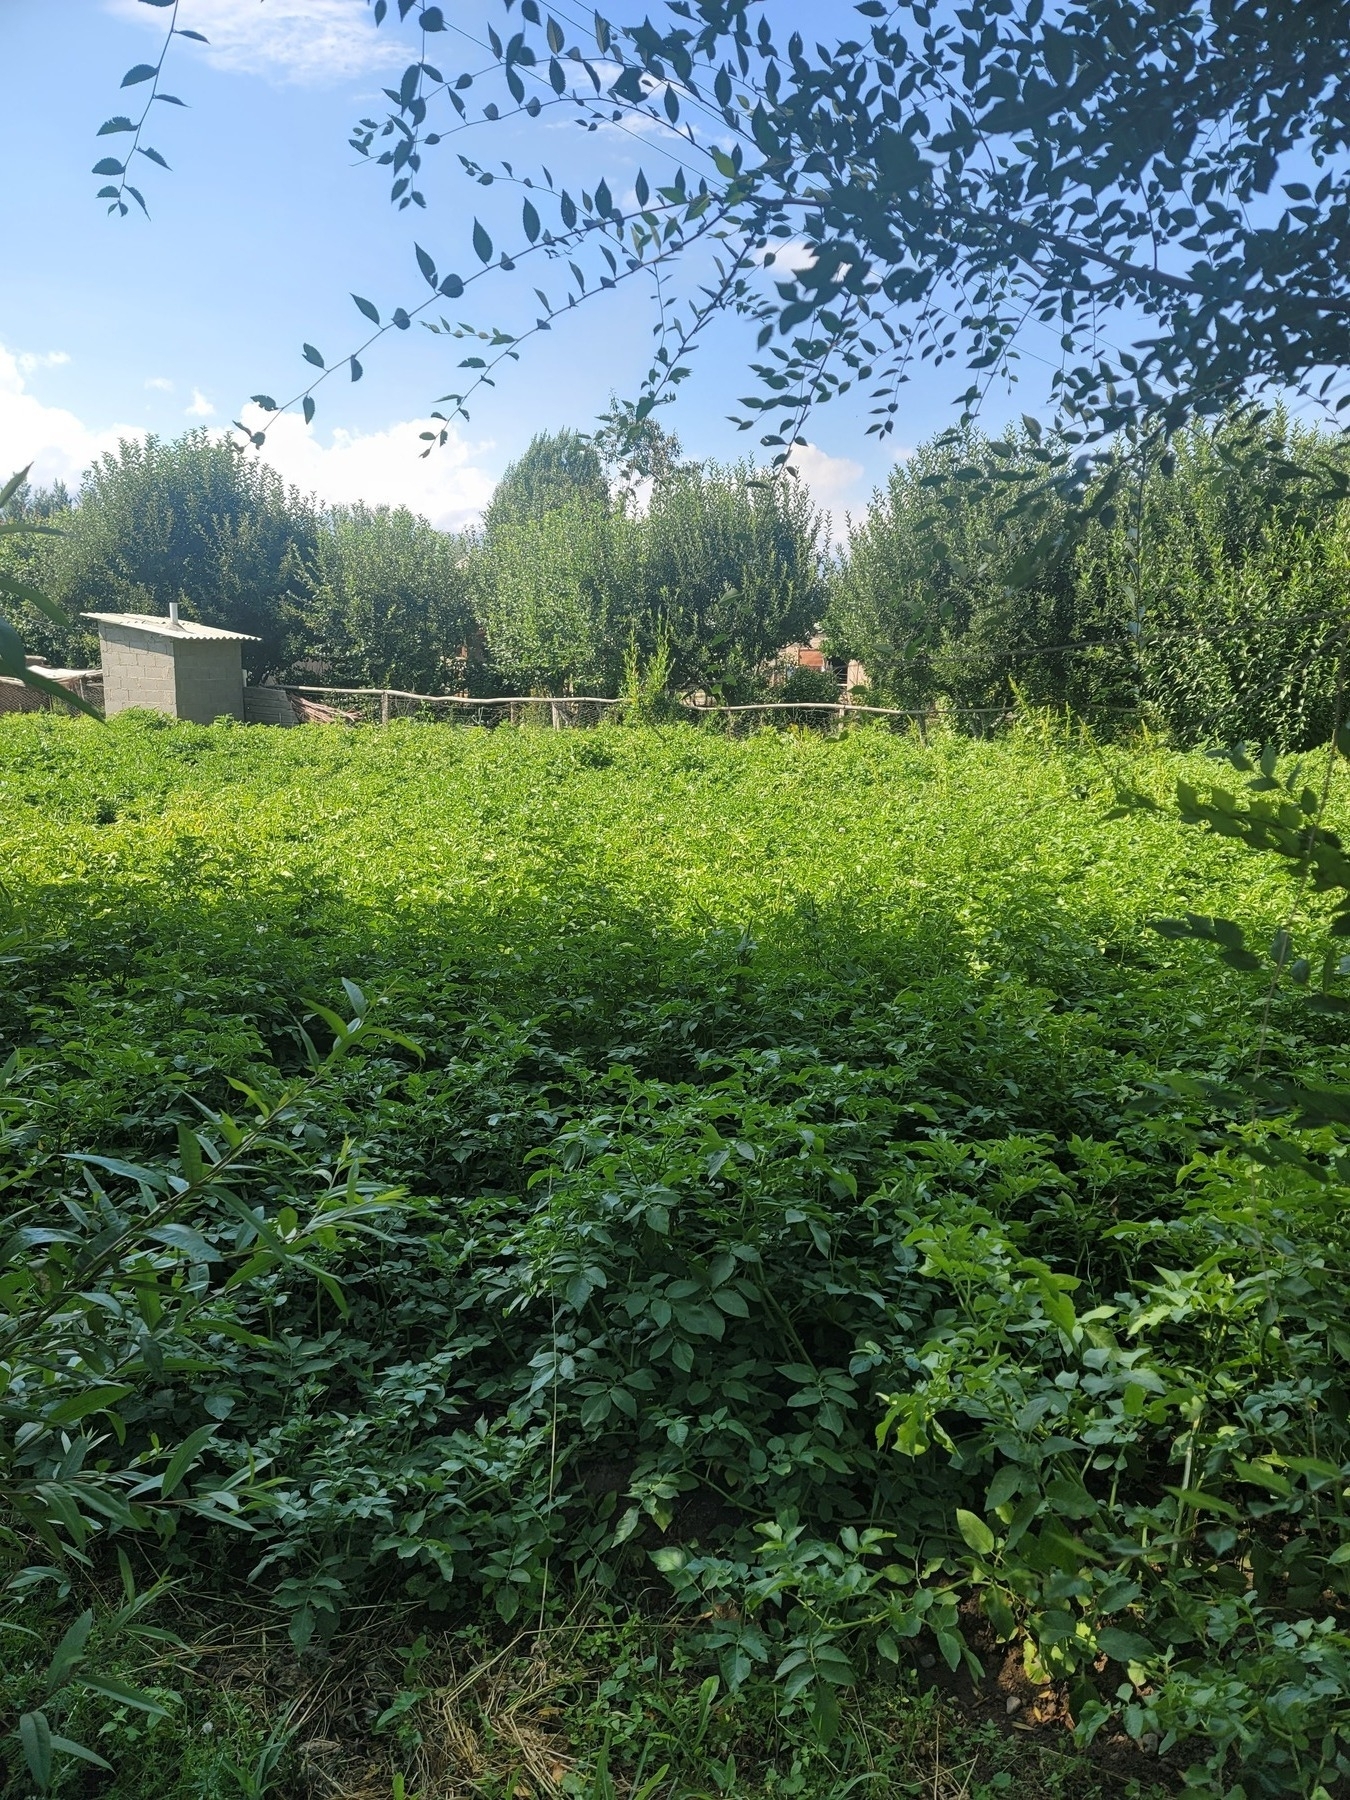 field of potato plants, those in the foreground under shade and those behind in the sun. a small building (which might be an outhouse) visible in the top left. trees behind the field